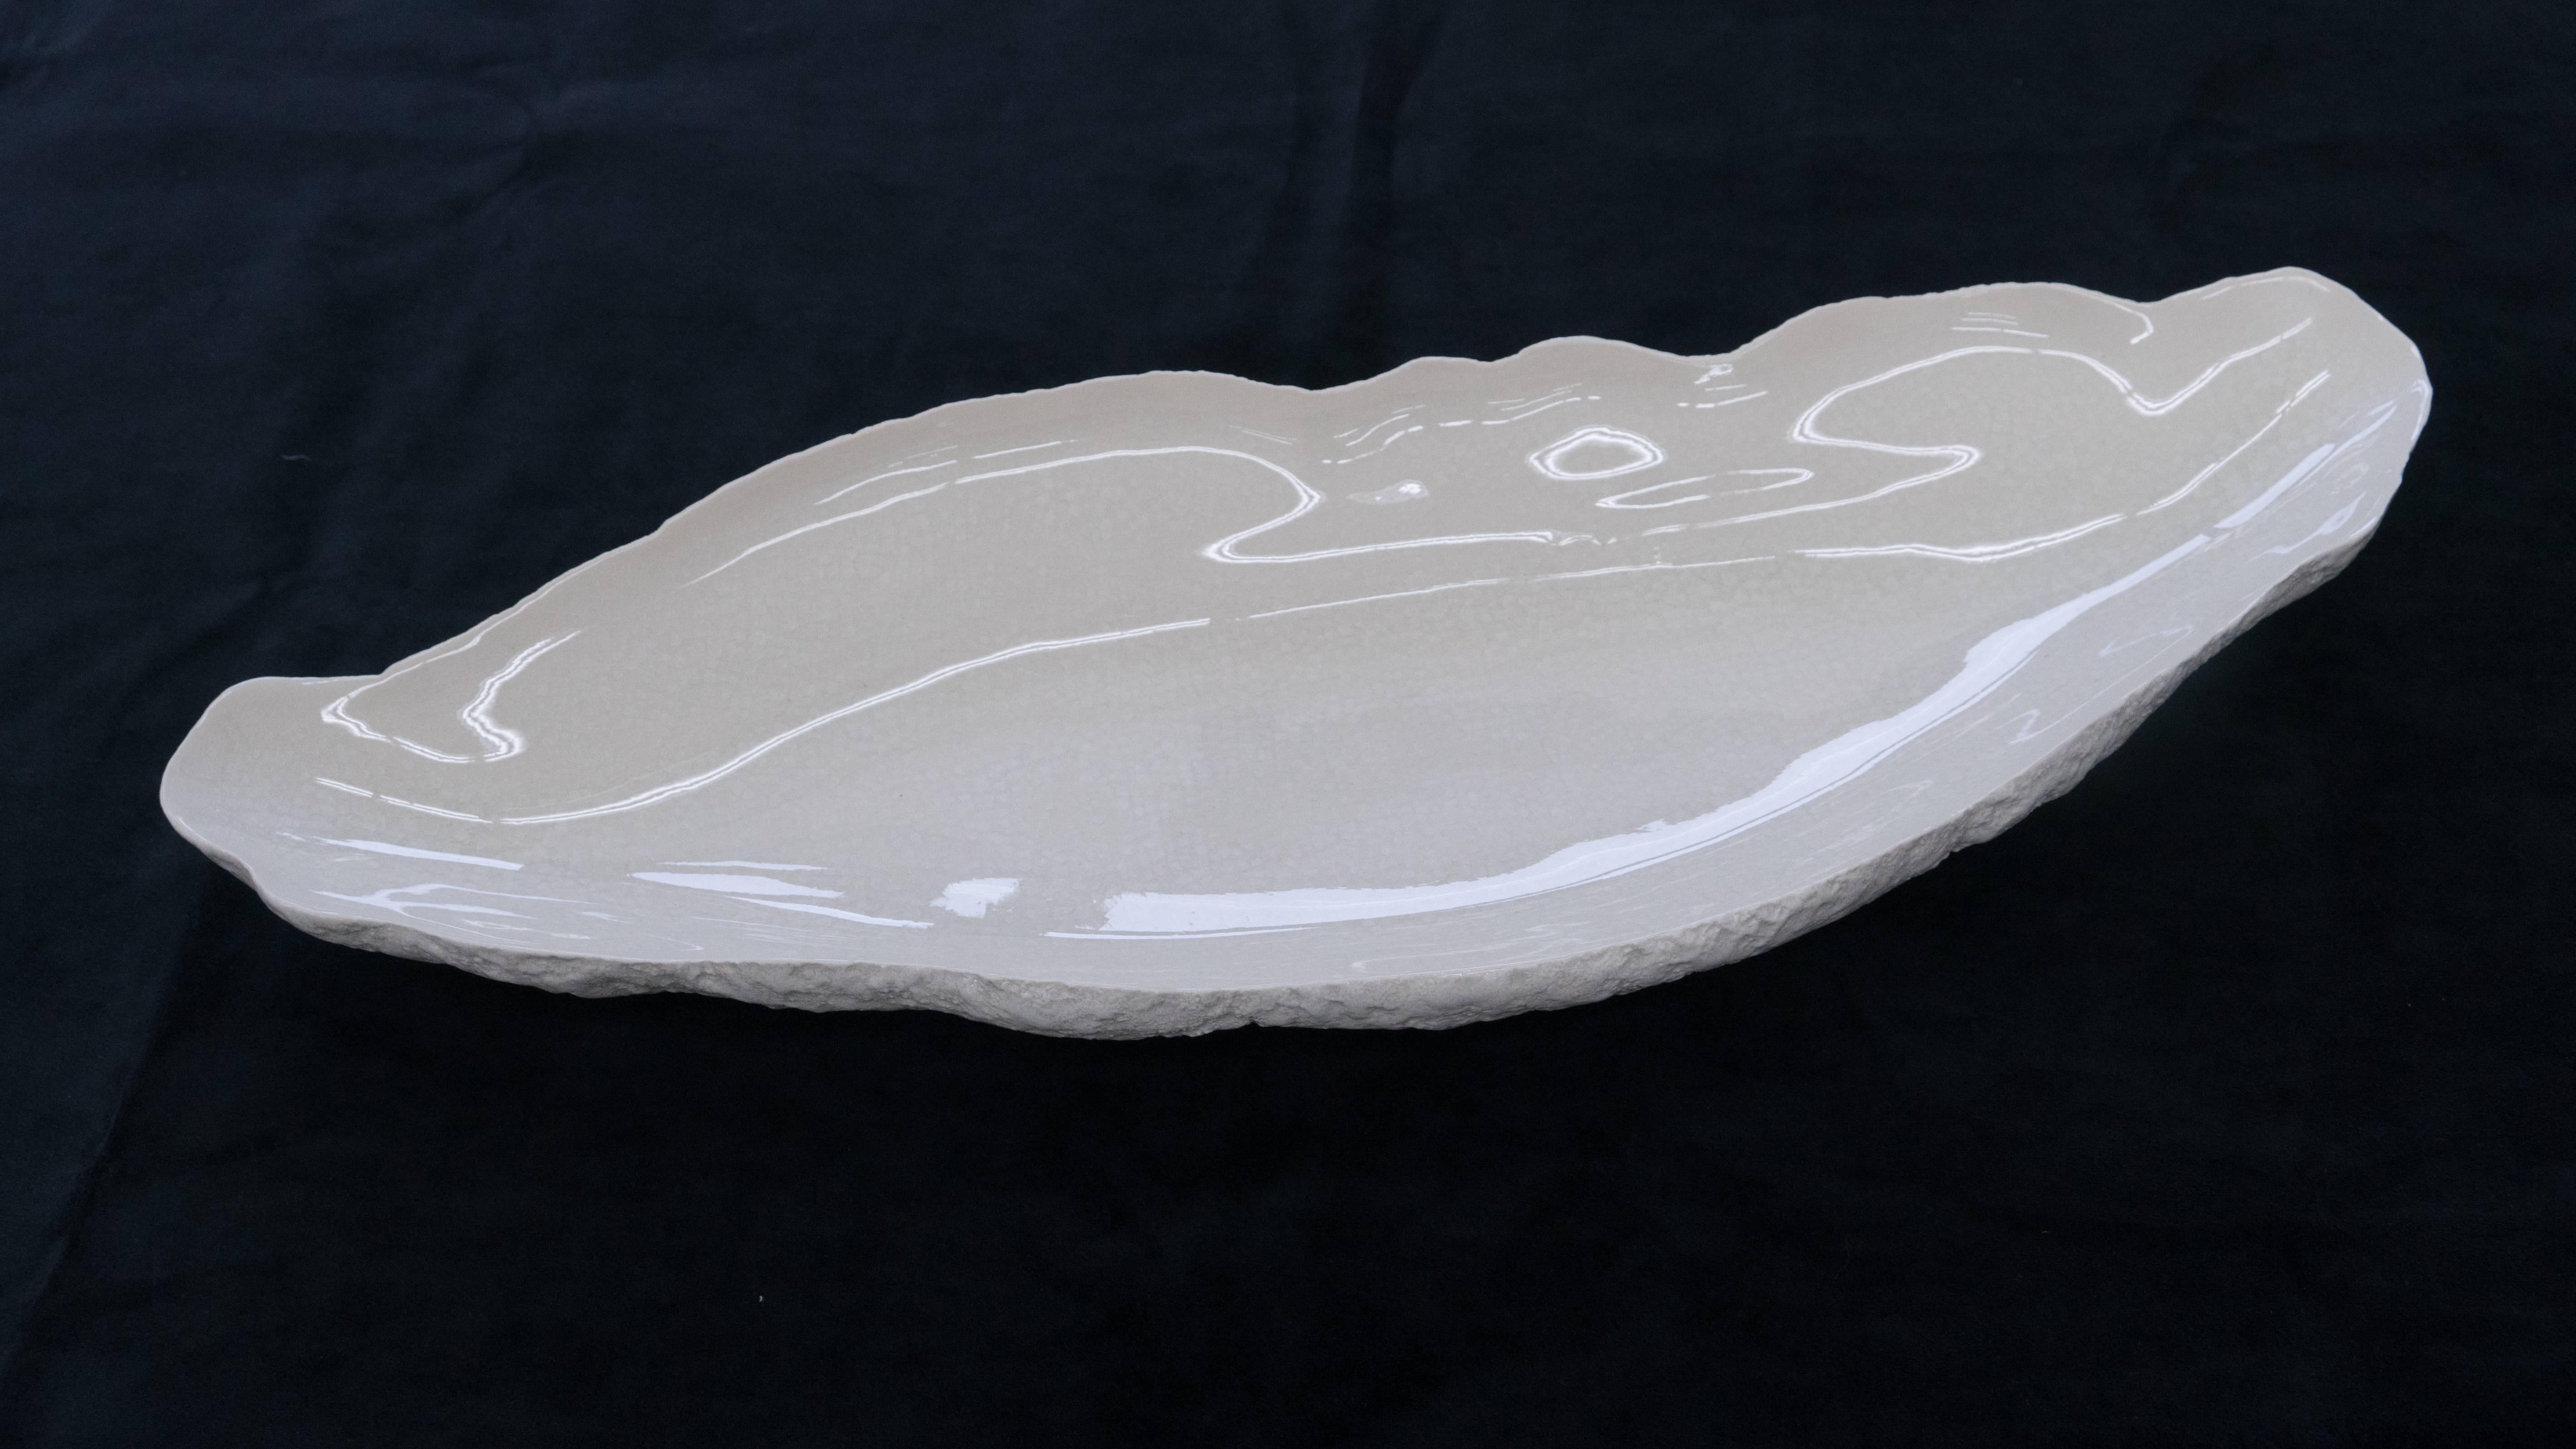 Large tray or platter in white ceramic. 

Beginning with a ball of clay, she pinches it into vessels and textures them with stone fragments. After multiple firing it was glazed and lustered. Its volcanic-like rough outer surface contrasts with the